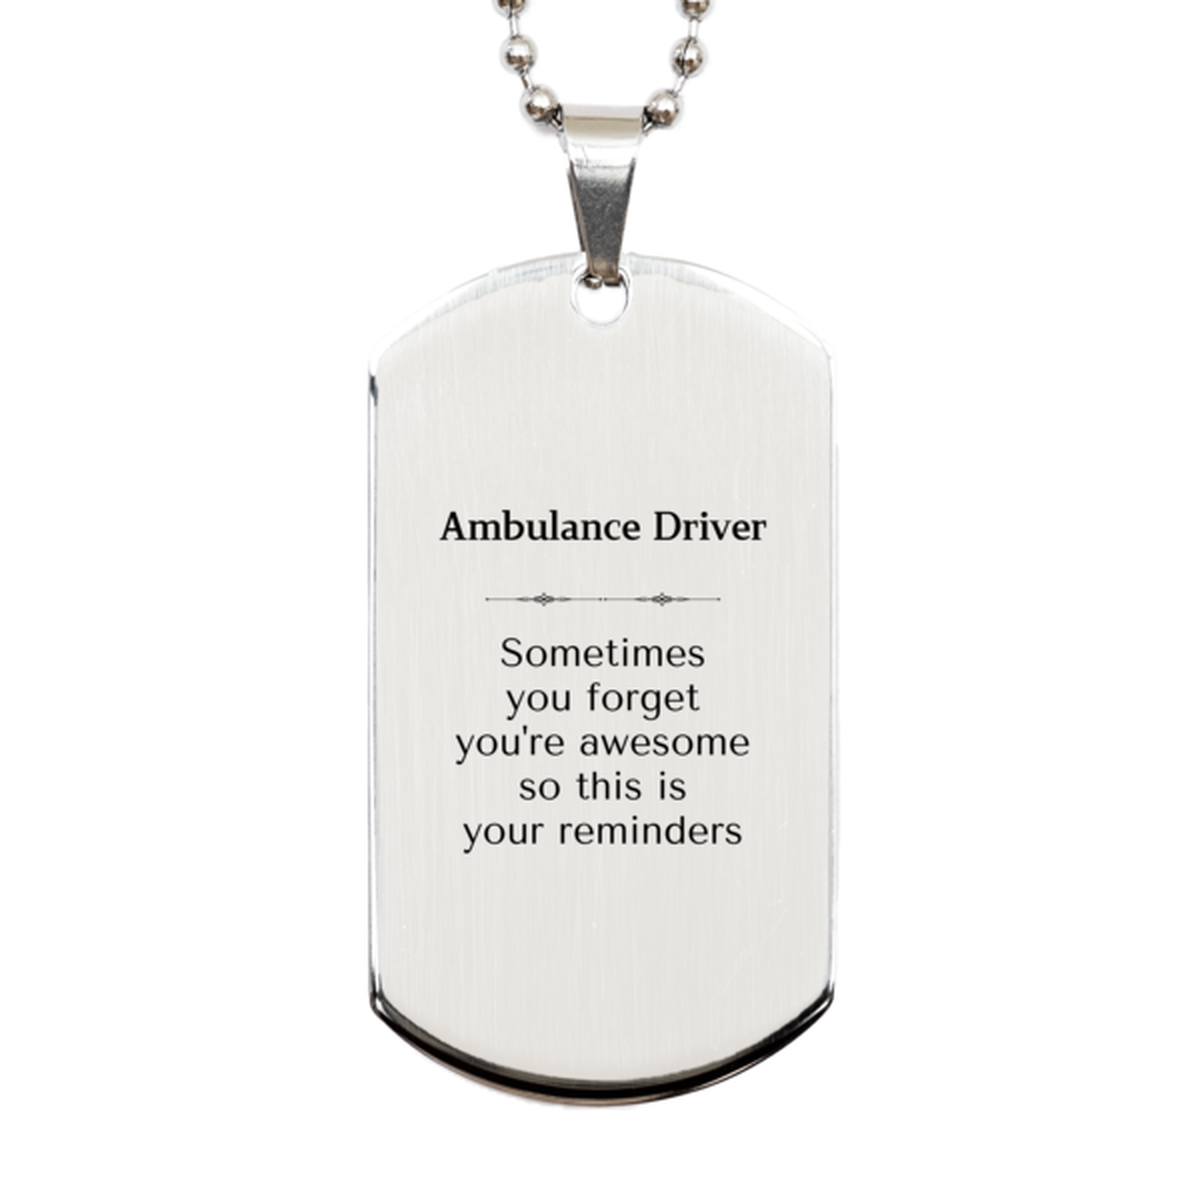 Sentimental Ambulance Driver Silver Dog Tag, Ambulance Driver Sometimes you forget you're awesome so this is your reminders, Graduation Christmas Birthday Gifts for Ambulance Driver, Men, Women, Coworkers